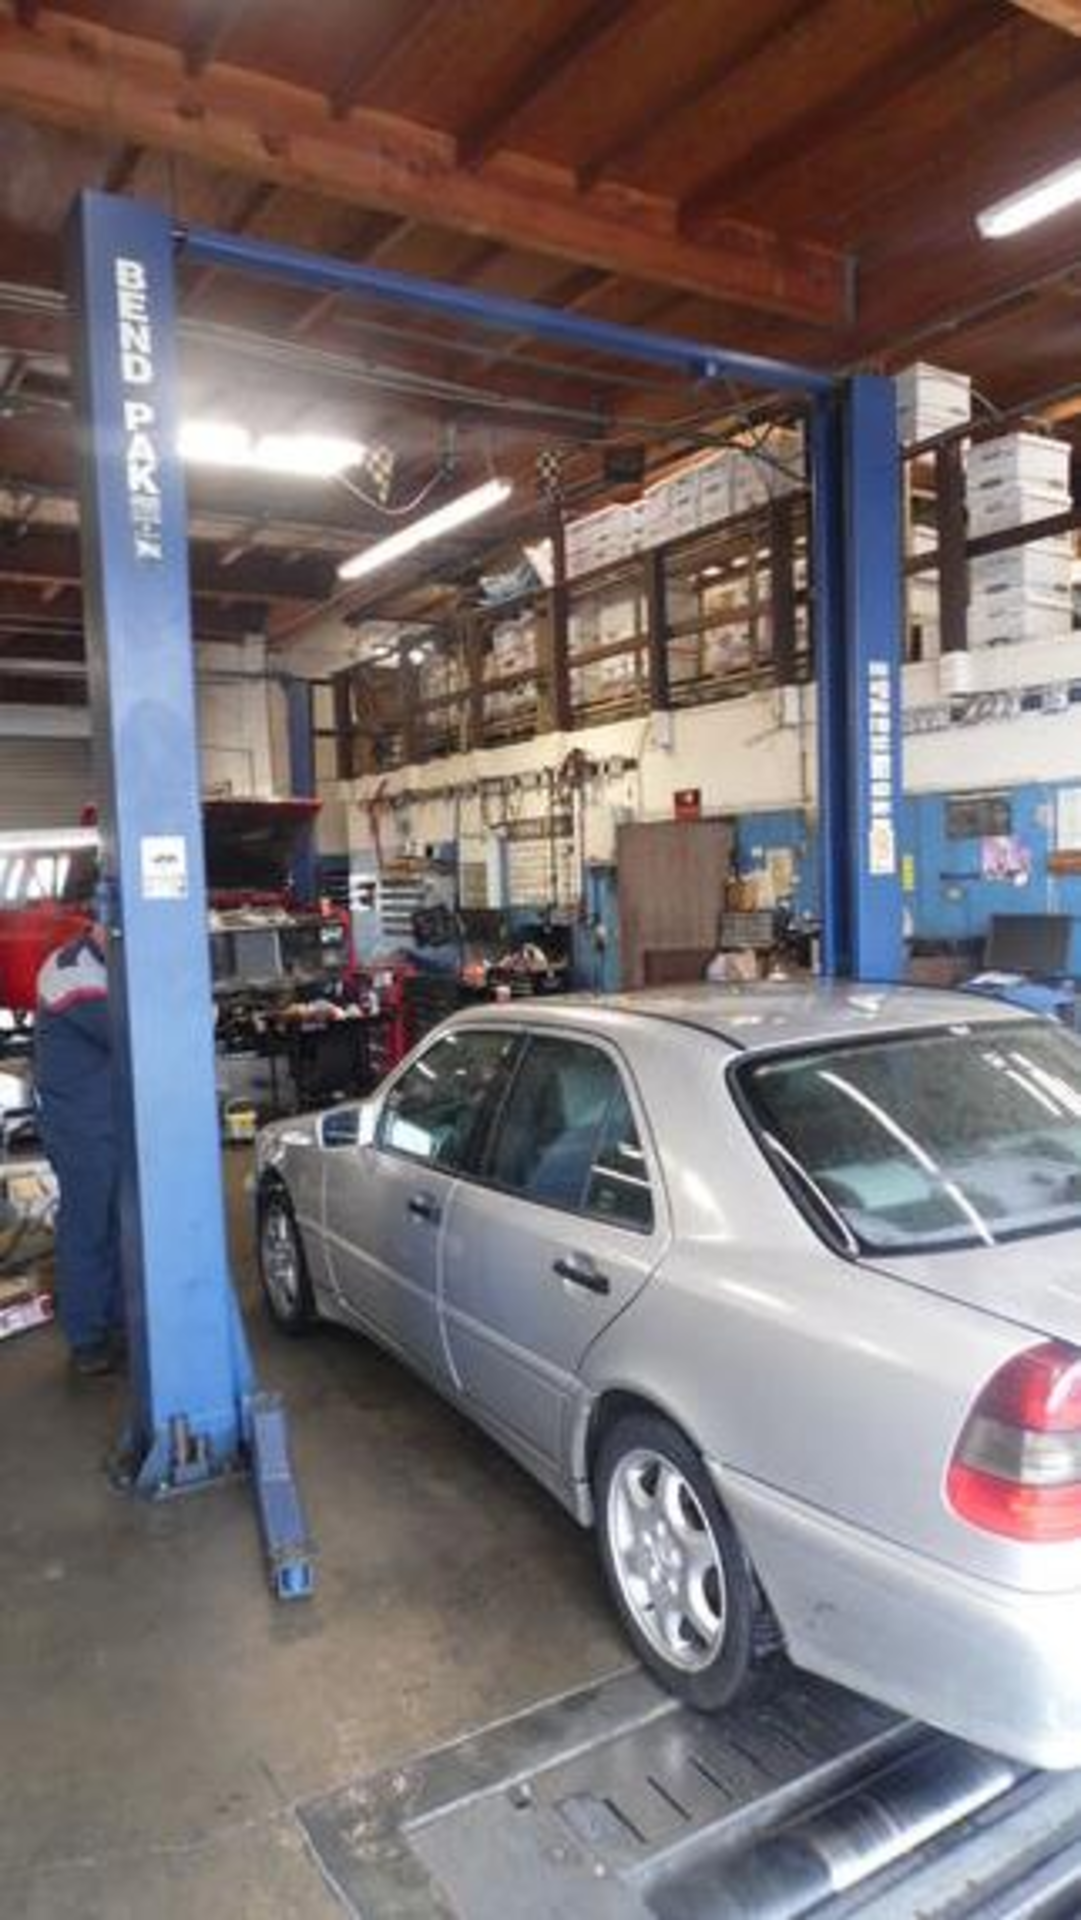 CLICK HERE FOR PREVIEW - Ayres Auto Service - Shop closing - Image 4 of 5